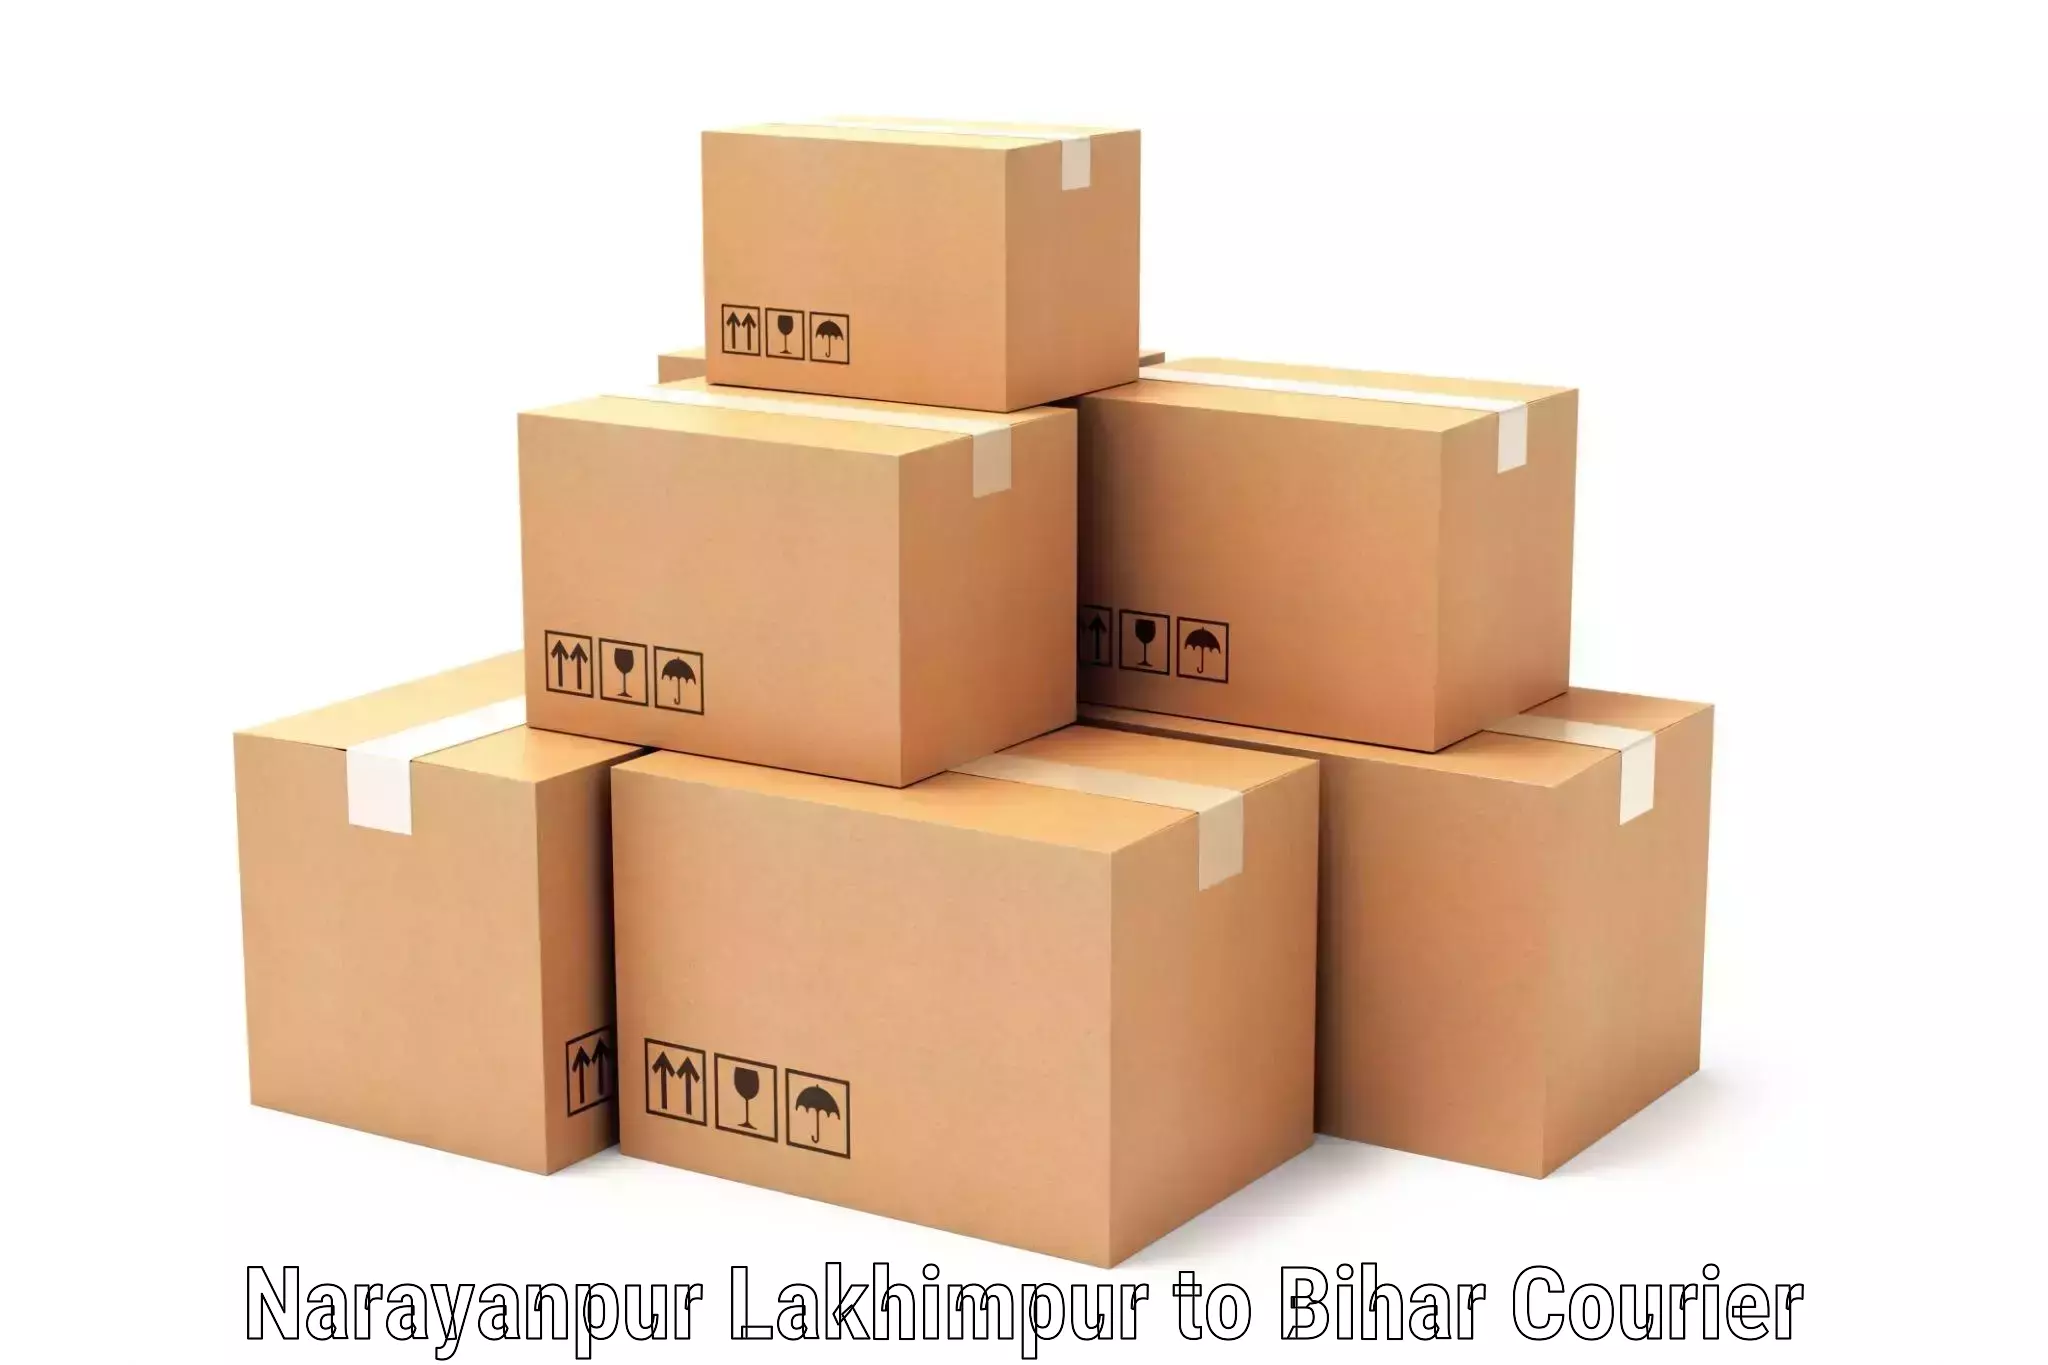 High-capacity courier solutions Narayanpur Lakhimpur to Mairwa